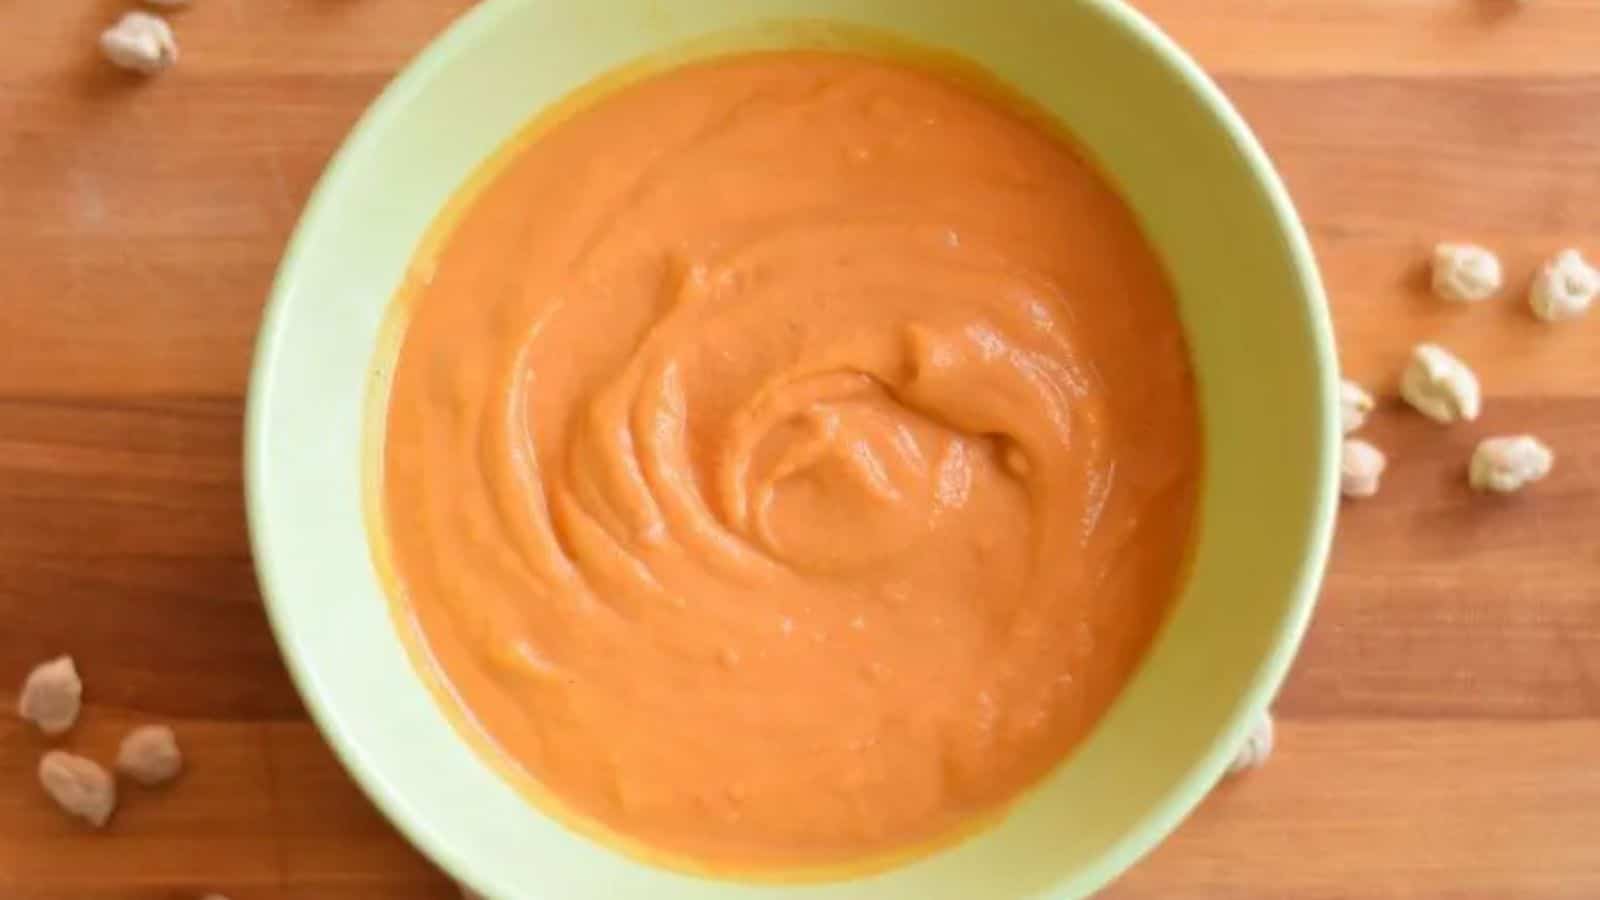 Image shows A bowl of creamy chickpea tomato soup with dried chickpeas around it.